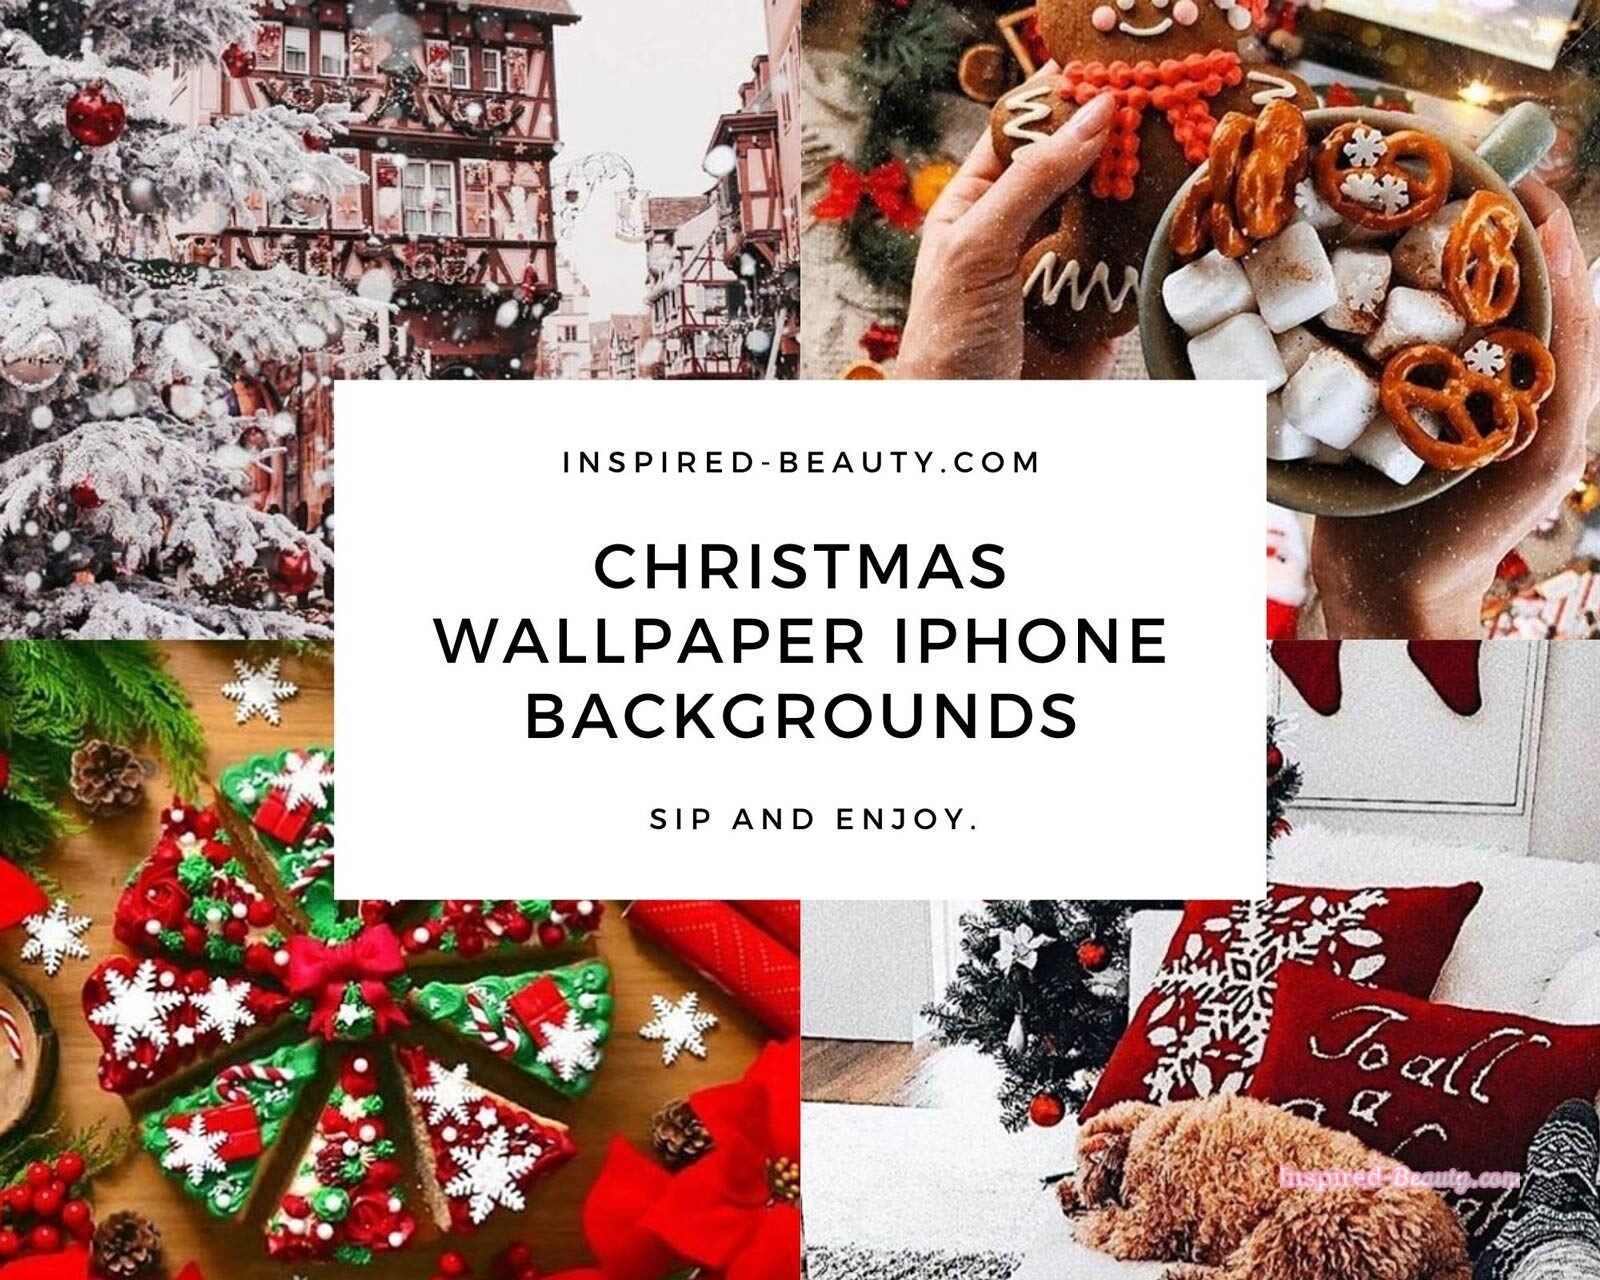 23 Free Aesthetic Christmas wallpaper iPhone backgrounds - Inspired Beauty